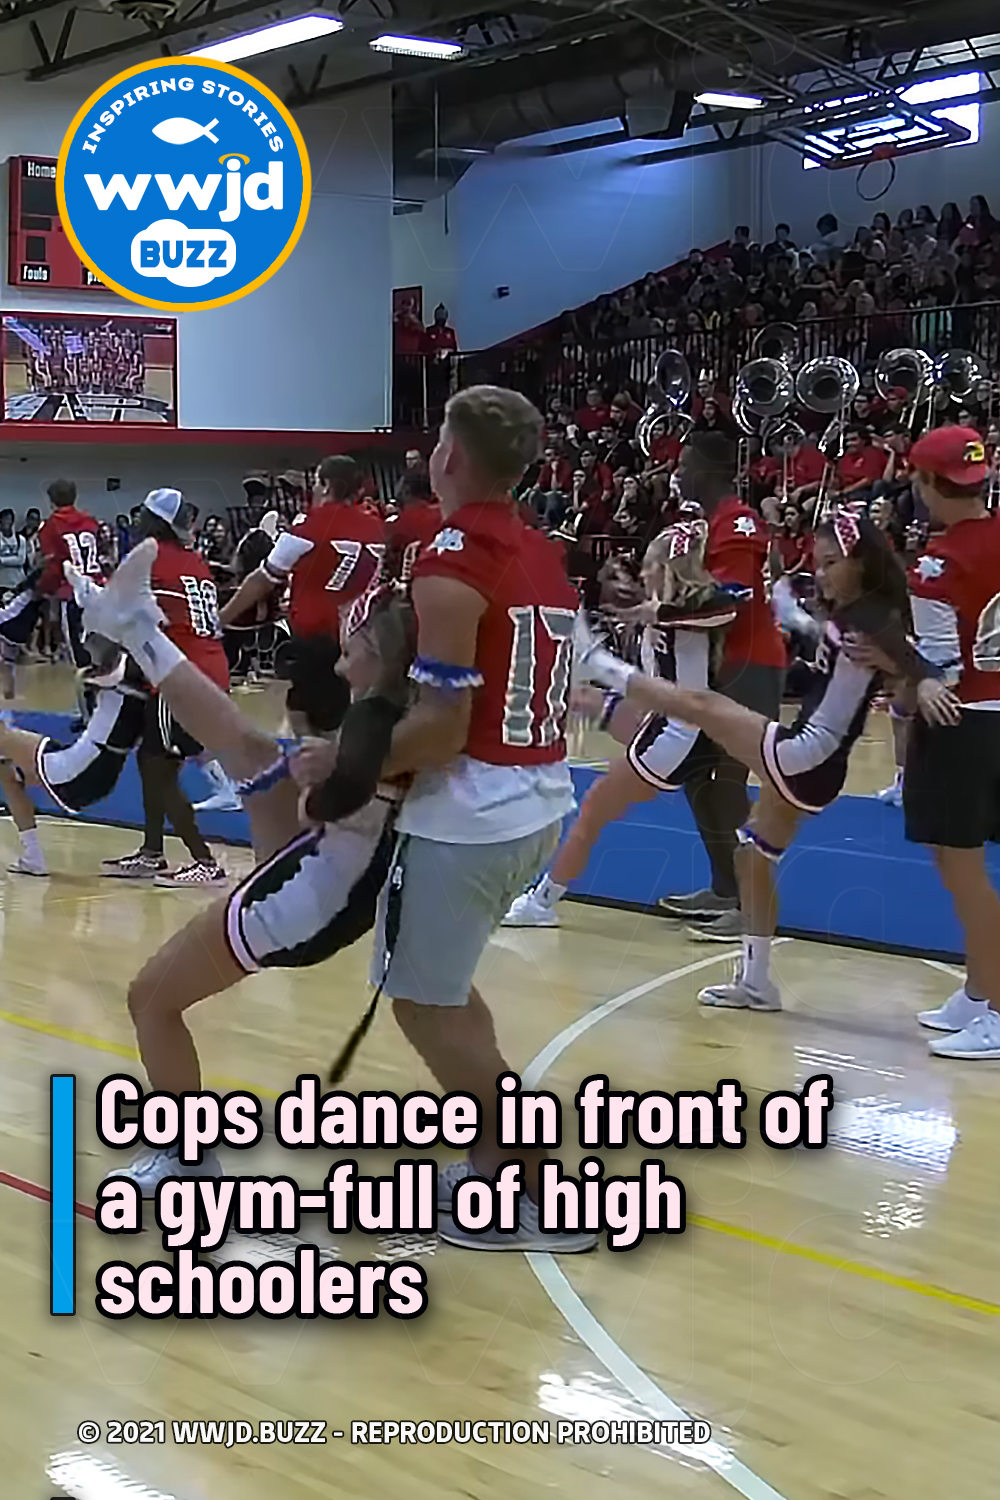 Cops dance in front of a gym-full of high schoolers